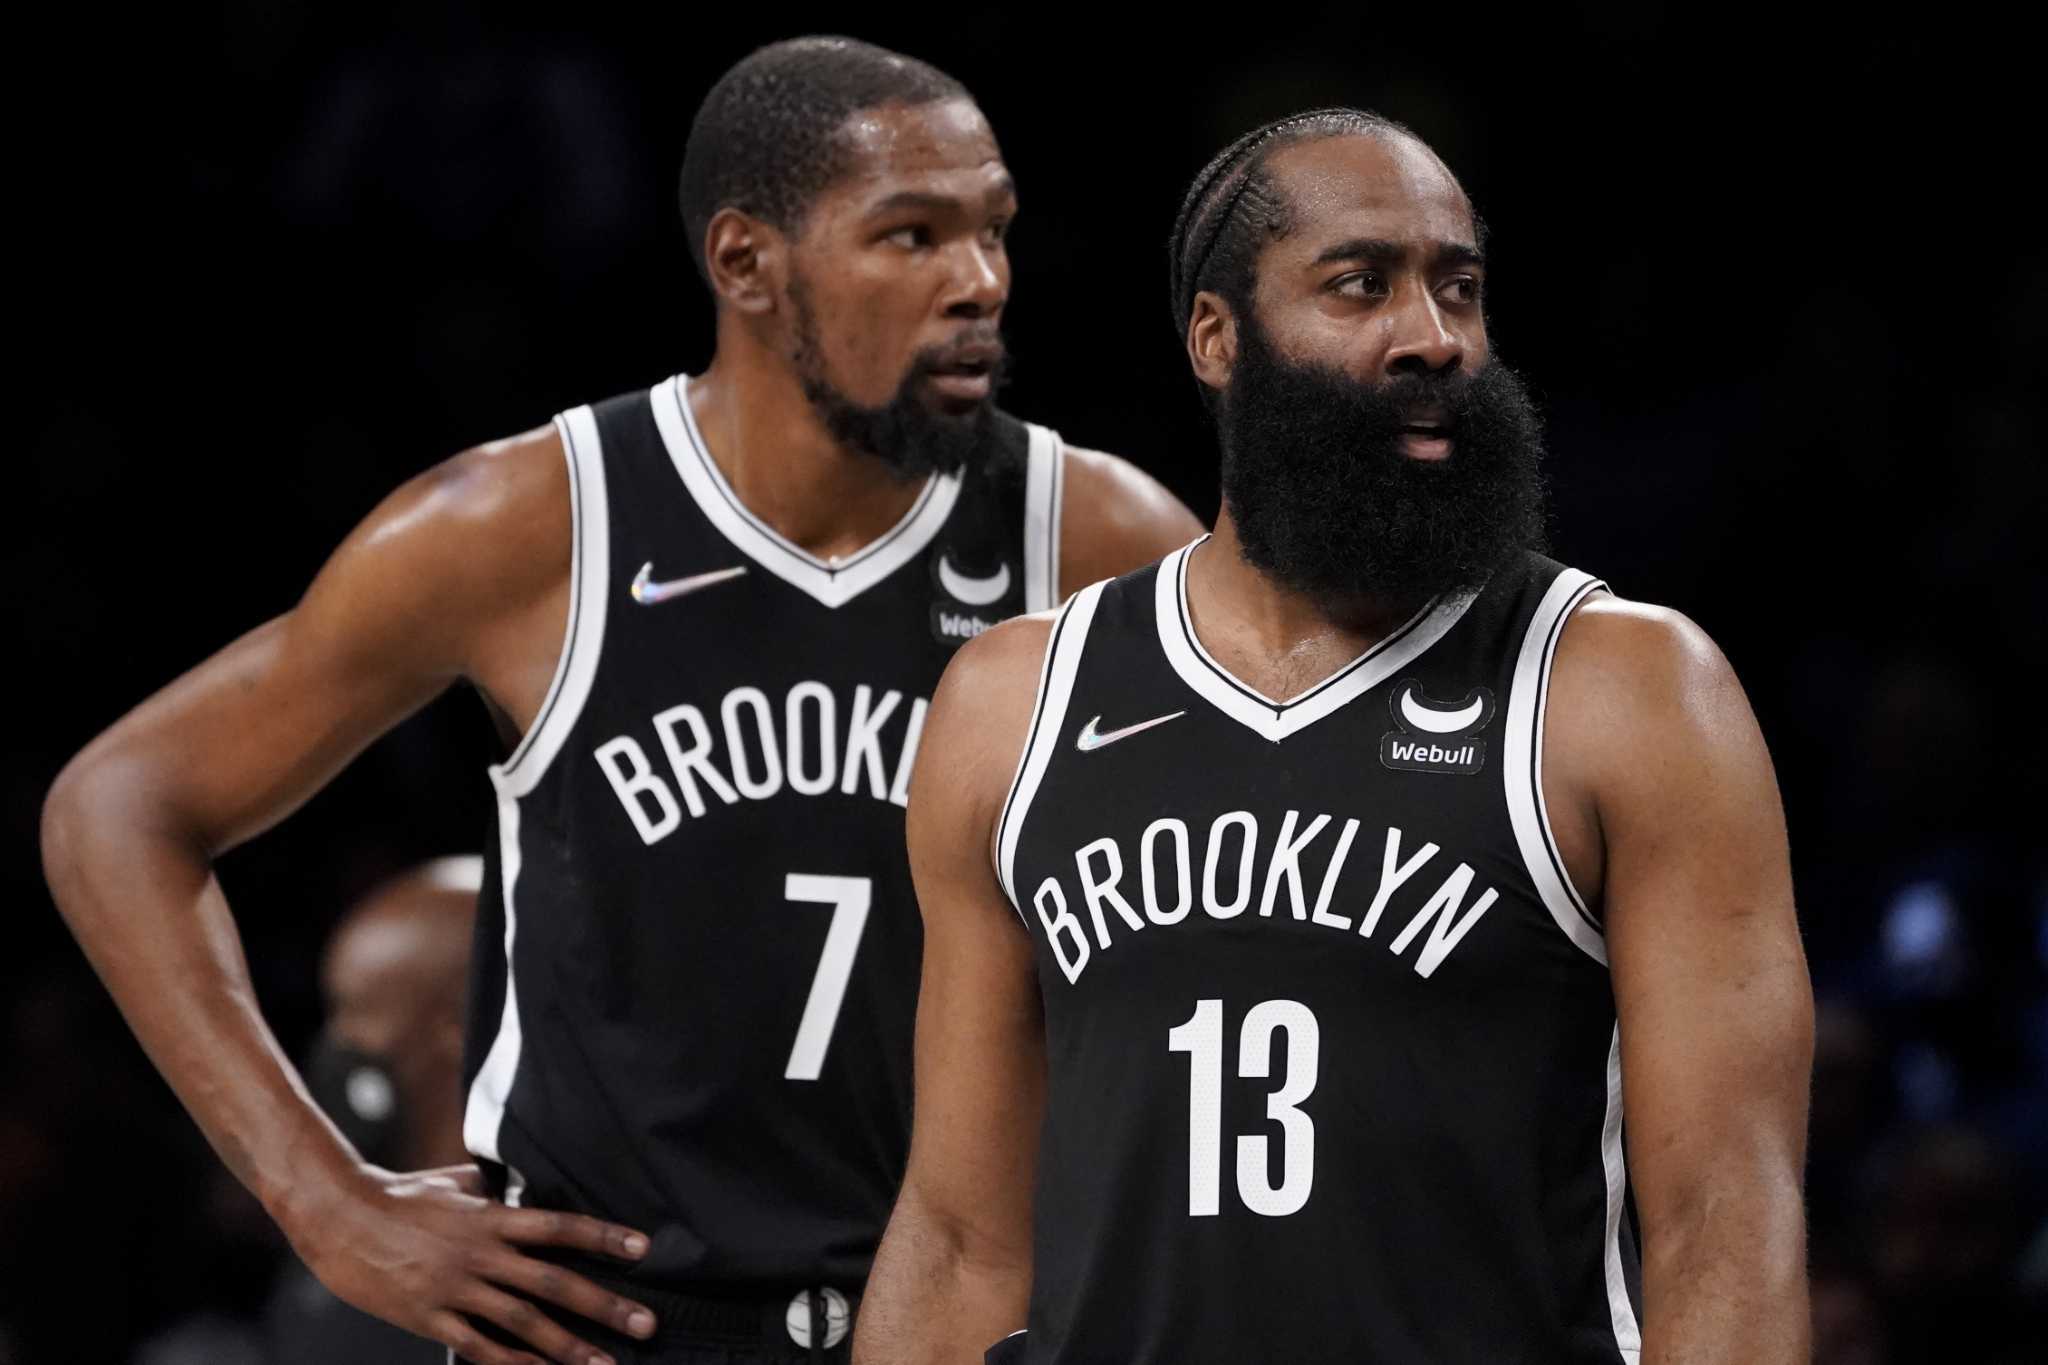 Proposed Kevin Durant Trade Gives Nets Four Player and Two Draft Pick Haul